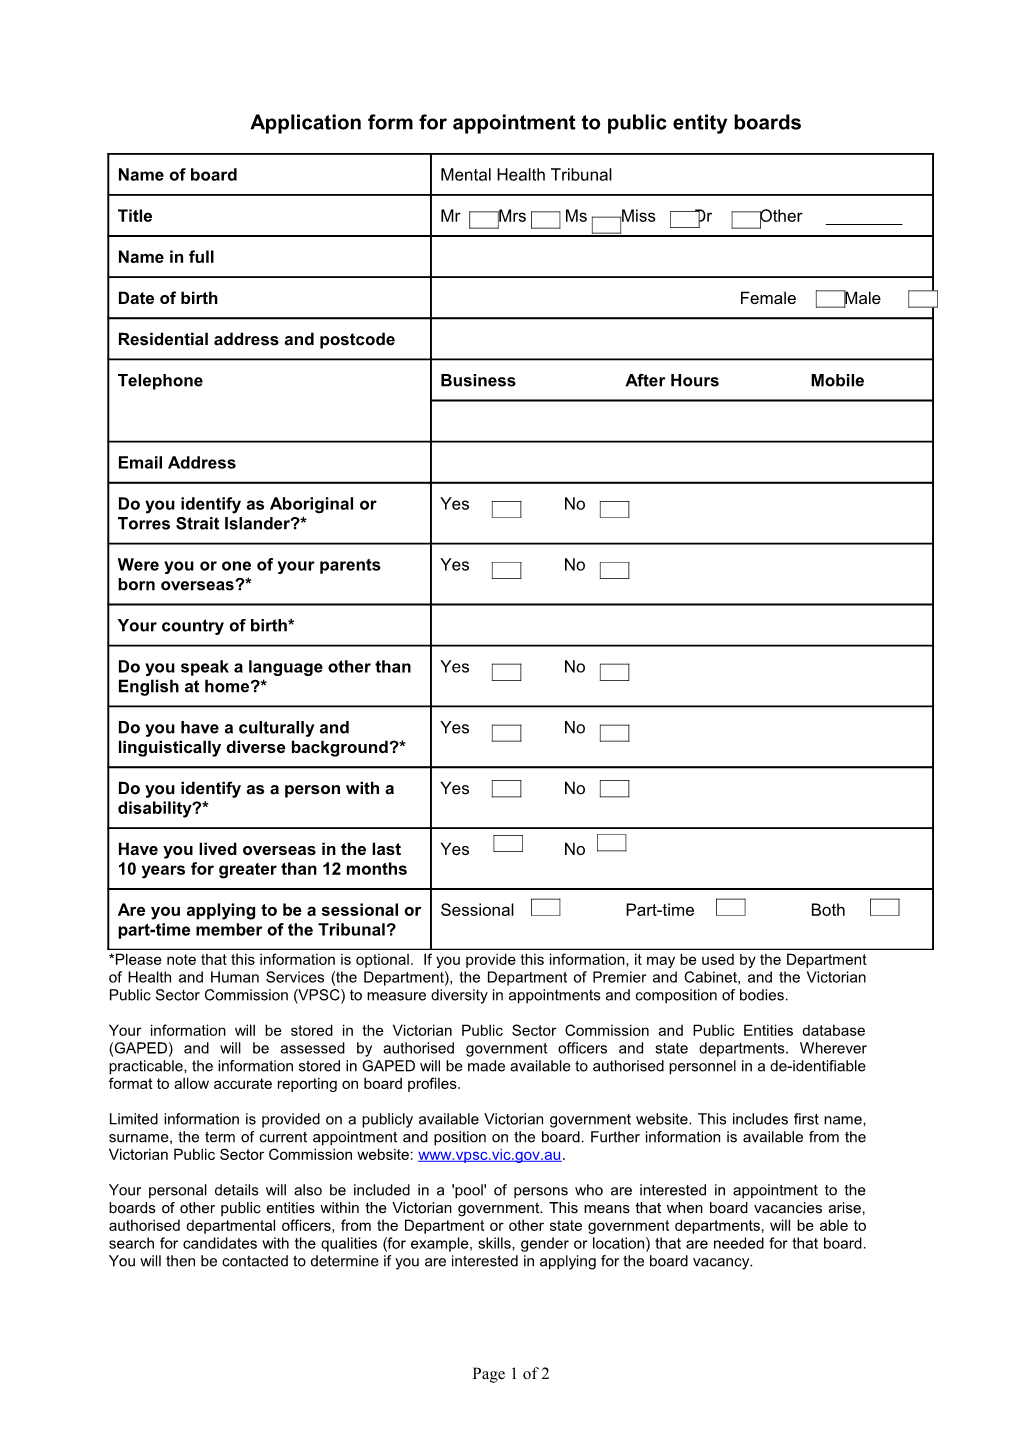 Application Form for Appointment to Public Entity Boards